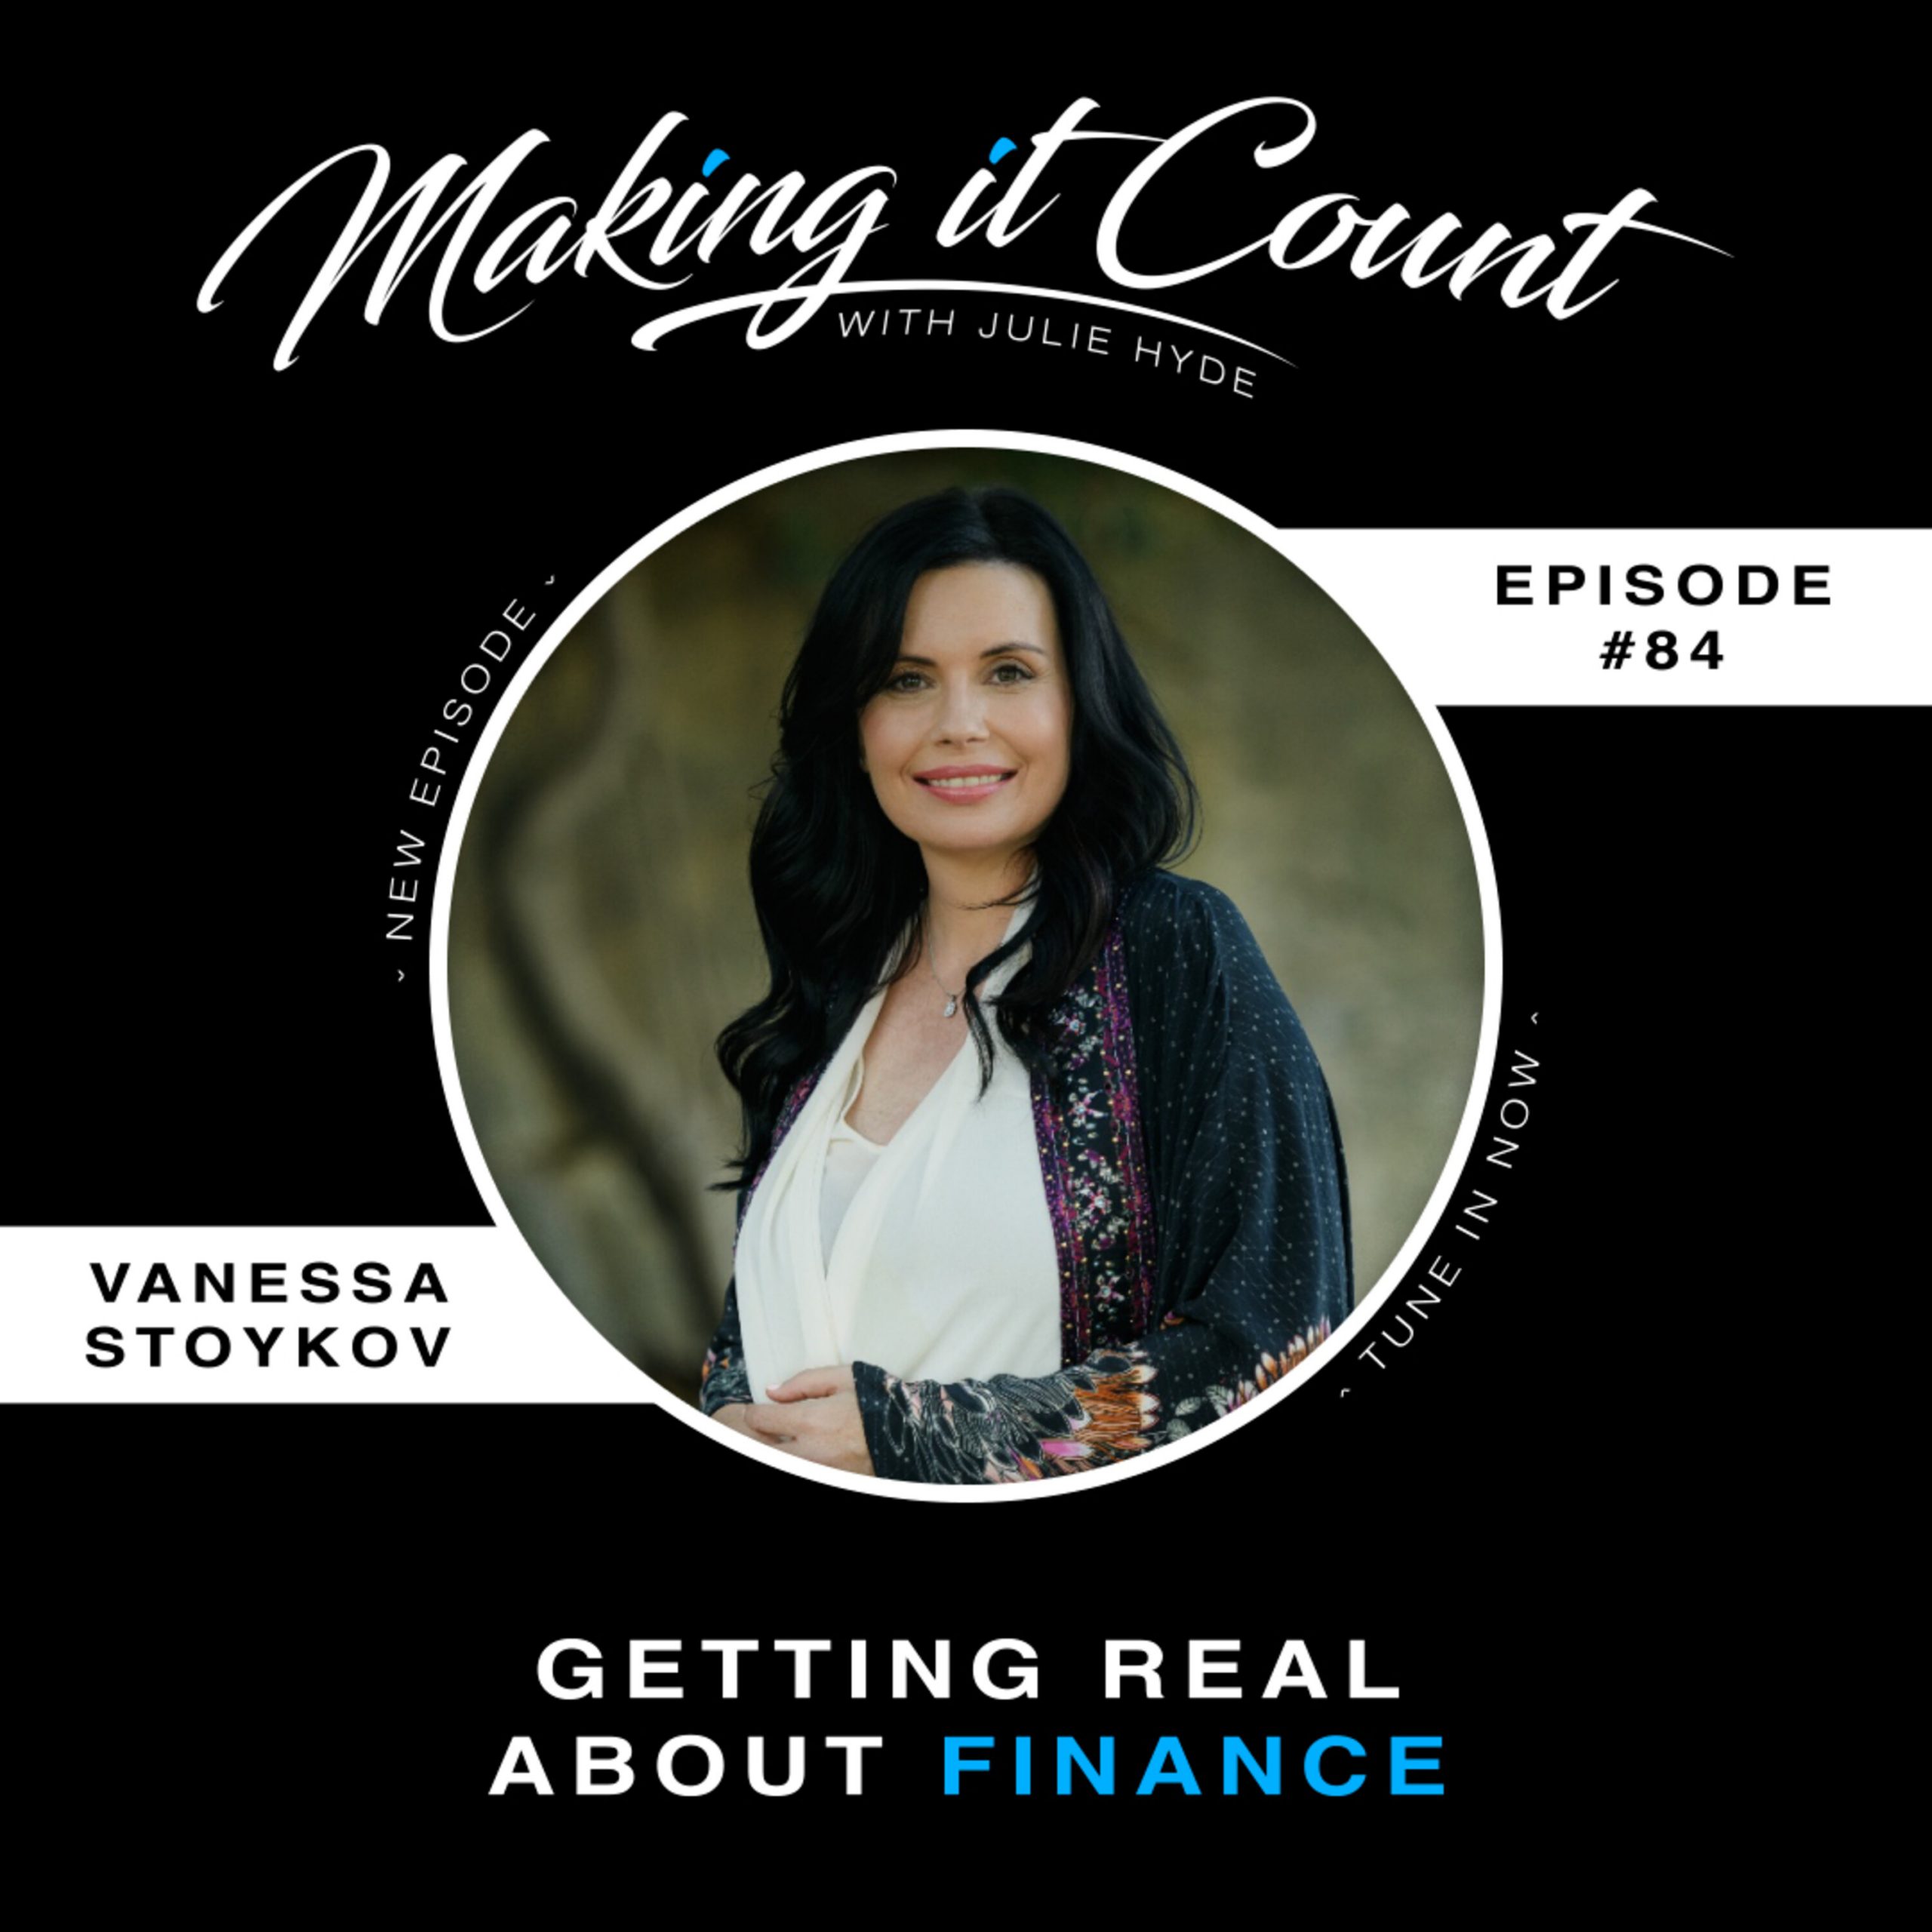 vanessa-stoykov-getting-real-about-finance-advice-julie-hyde-making-it-count-busy-leadership-leader-leaders-keynote-mindset-speaker-mentor-business-empower-lead-empowering-podcast-great-intentional-authentic-mentor-coach-role-model-top-best-inspire-engage-practical-insightful-boost-performance-tips-how-to-strategy-powerful-change-mindset-thrive-results-corporate-future-smart-program-mentorship-career-next-level-step-reconnect-control-proactive-agile-adaptable-one-on-one-woman-lady-boss-female-sydney-australia-speaker-host-guide-guidance-business-ceo-management